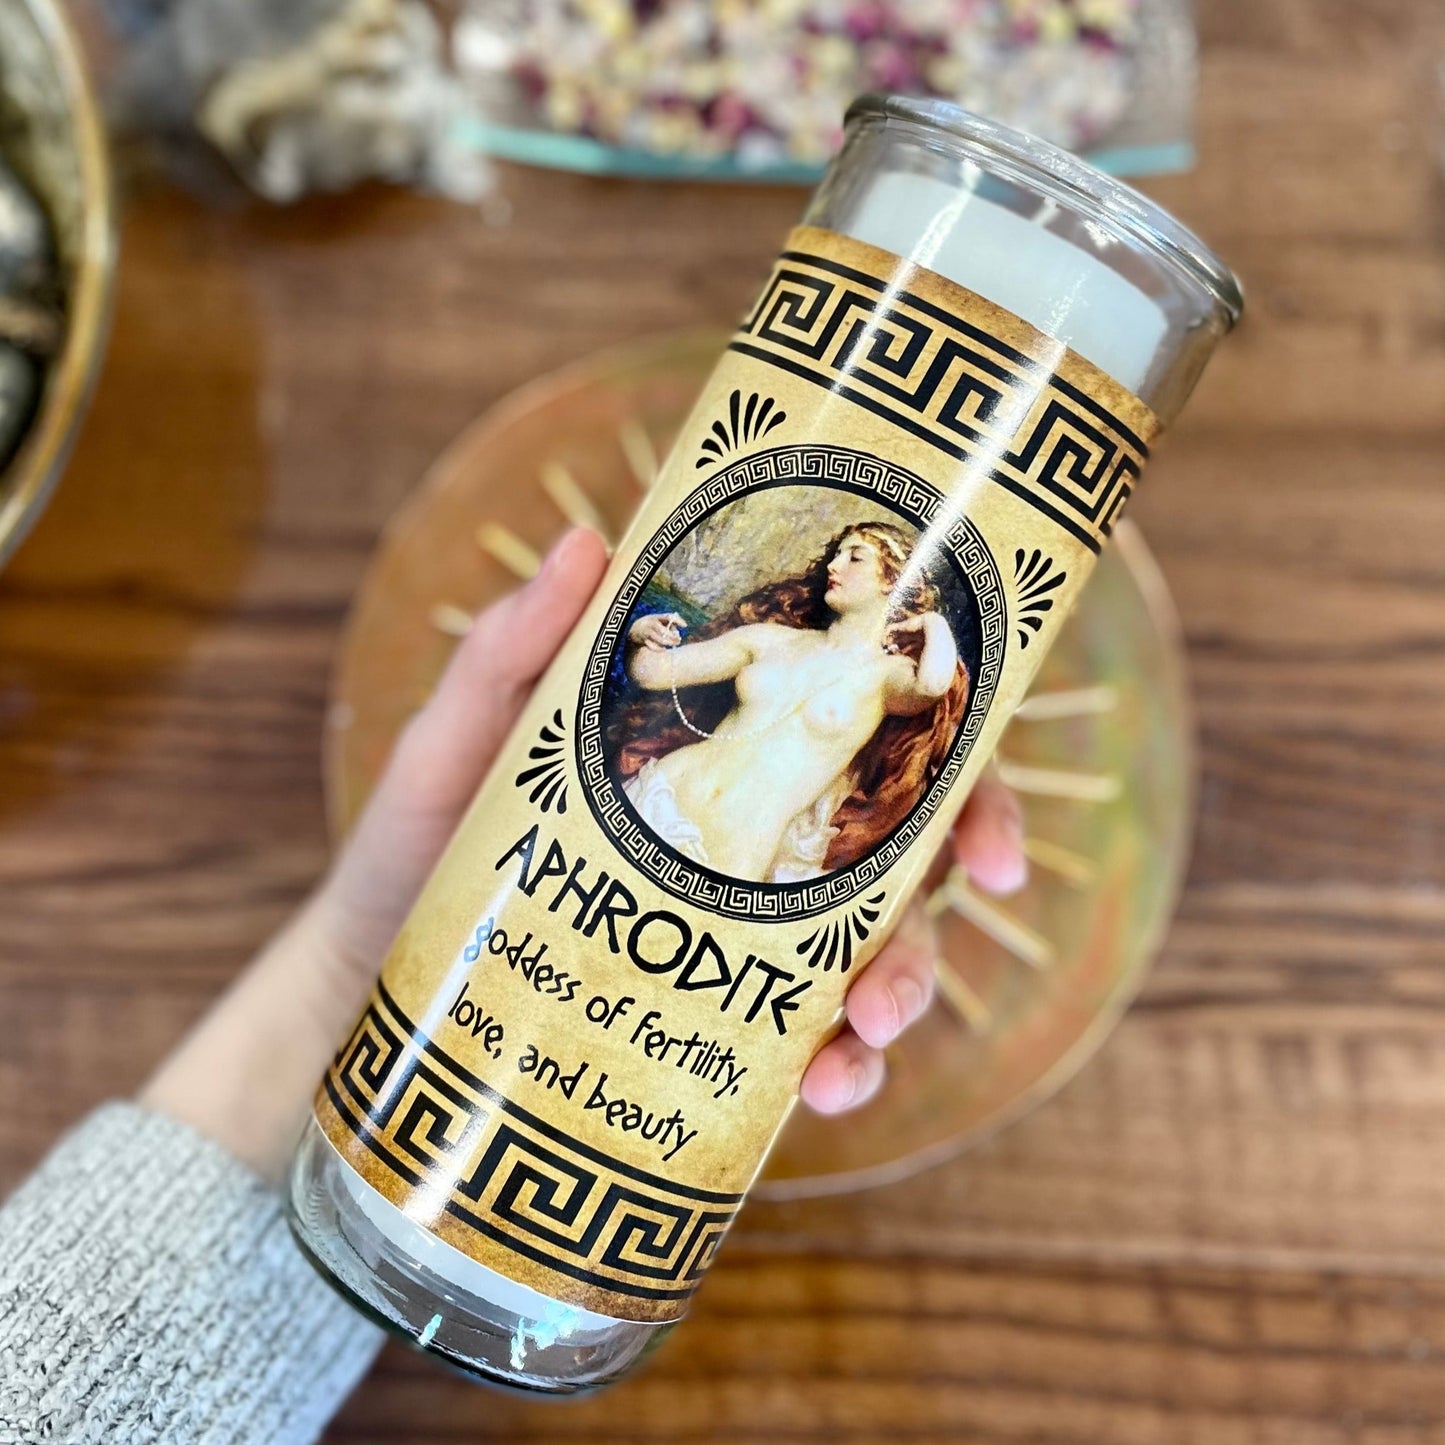 Aphrodite Novena Candle - North Witch Magick Co.